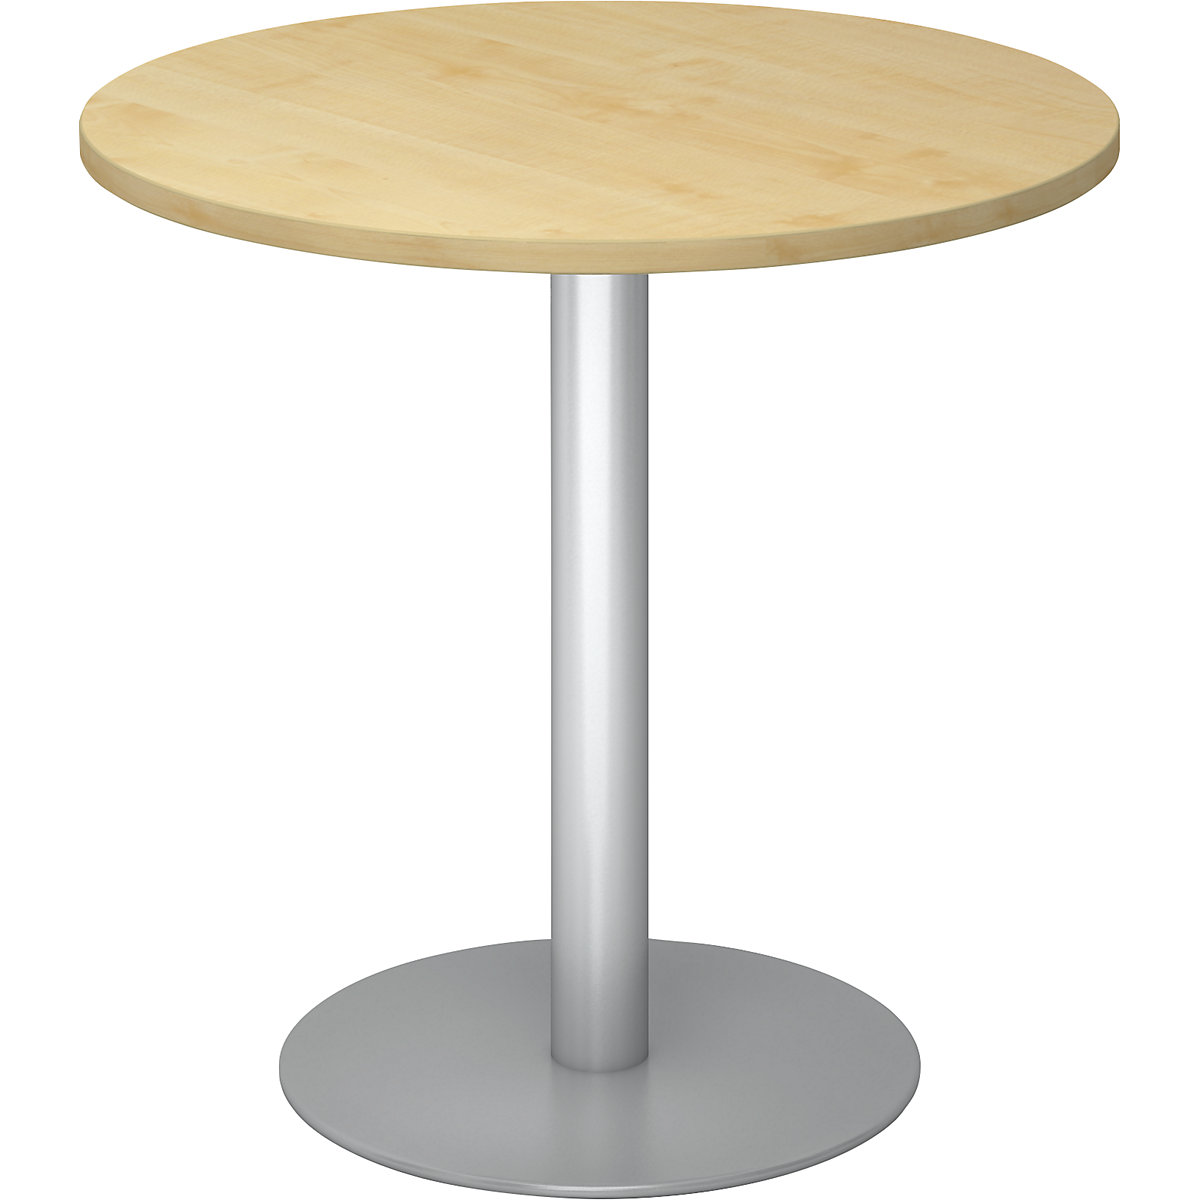 Conference table, Ø 800 mm, 755 mm high, silver frame, tabletop in maple finish-6